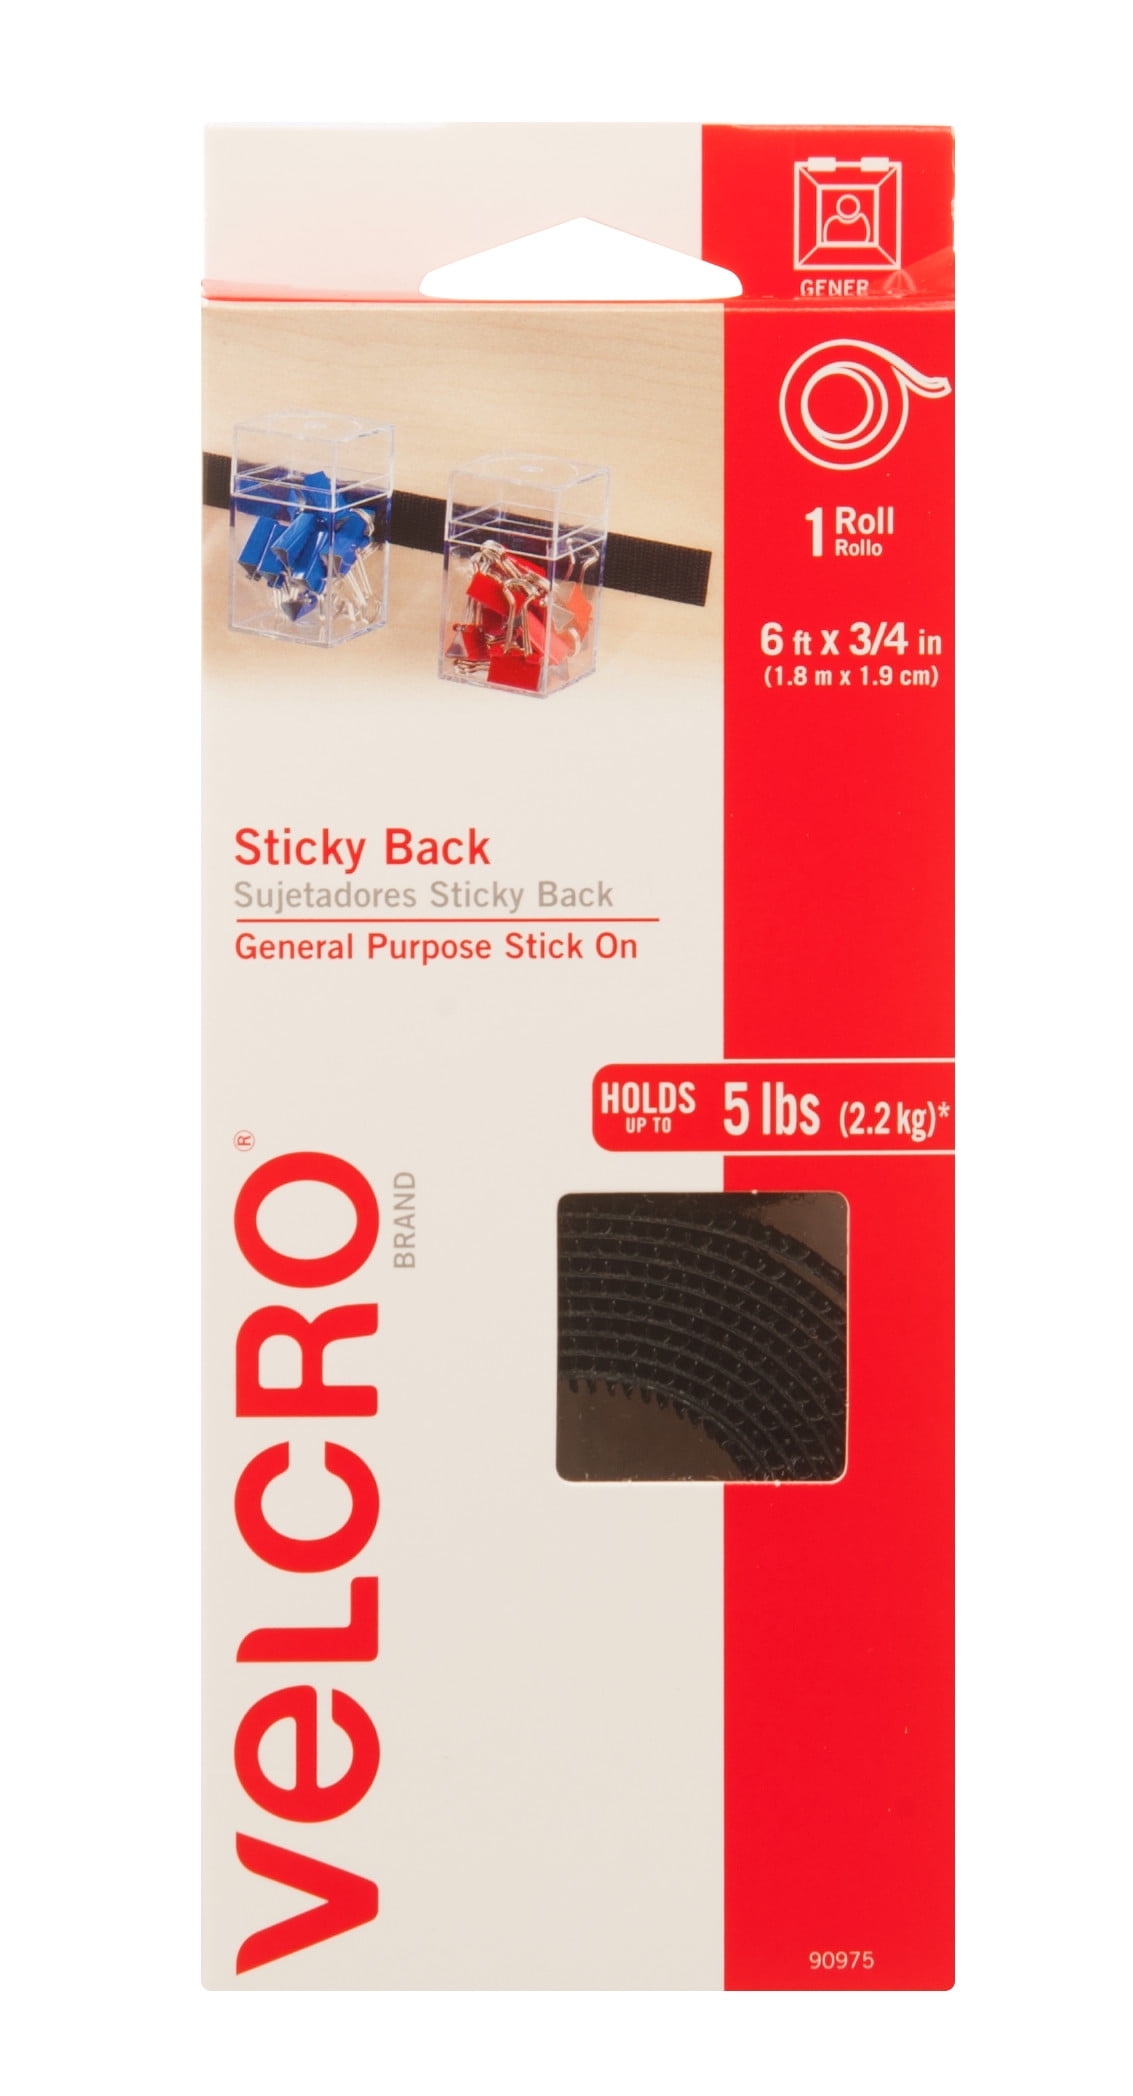 VELCRO Brand 6 Ft x 3/4 In  Sticky Back Tape Roll with Adhesive